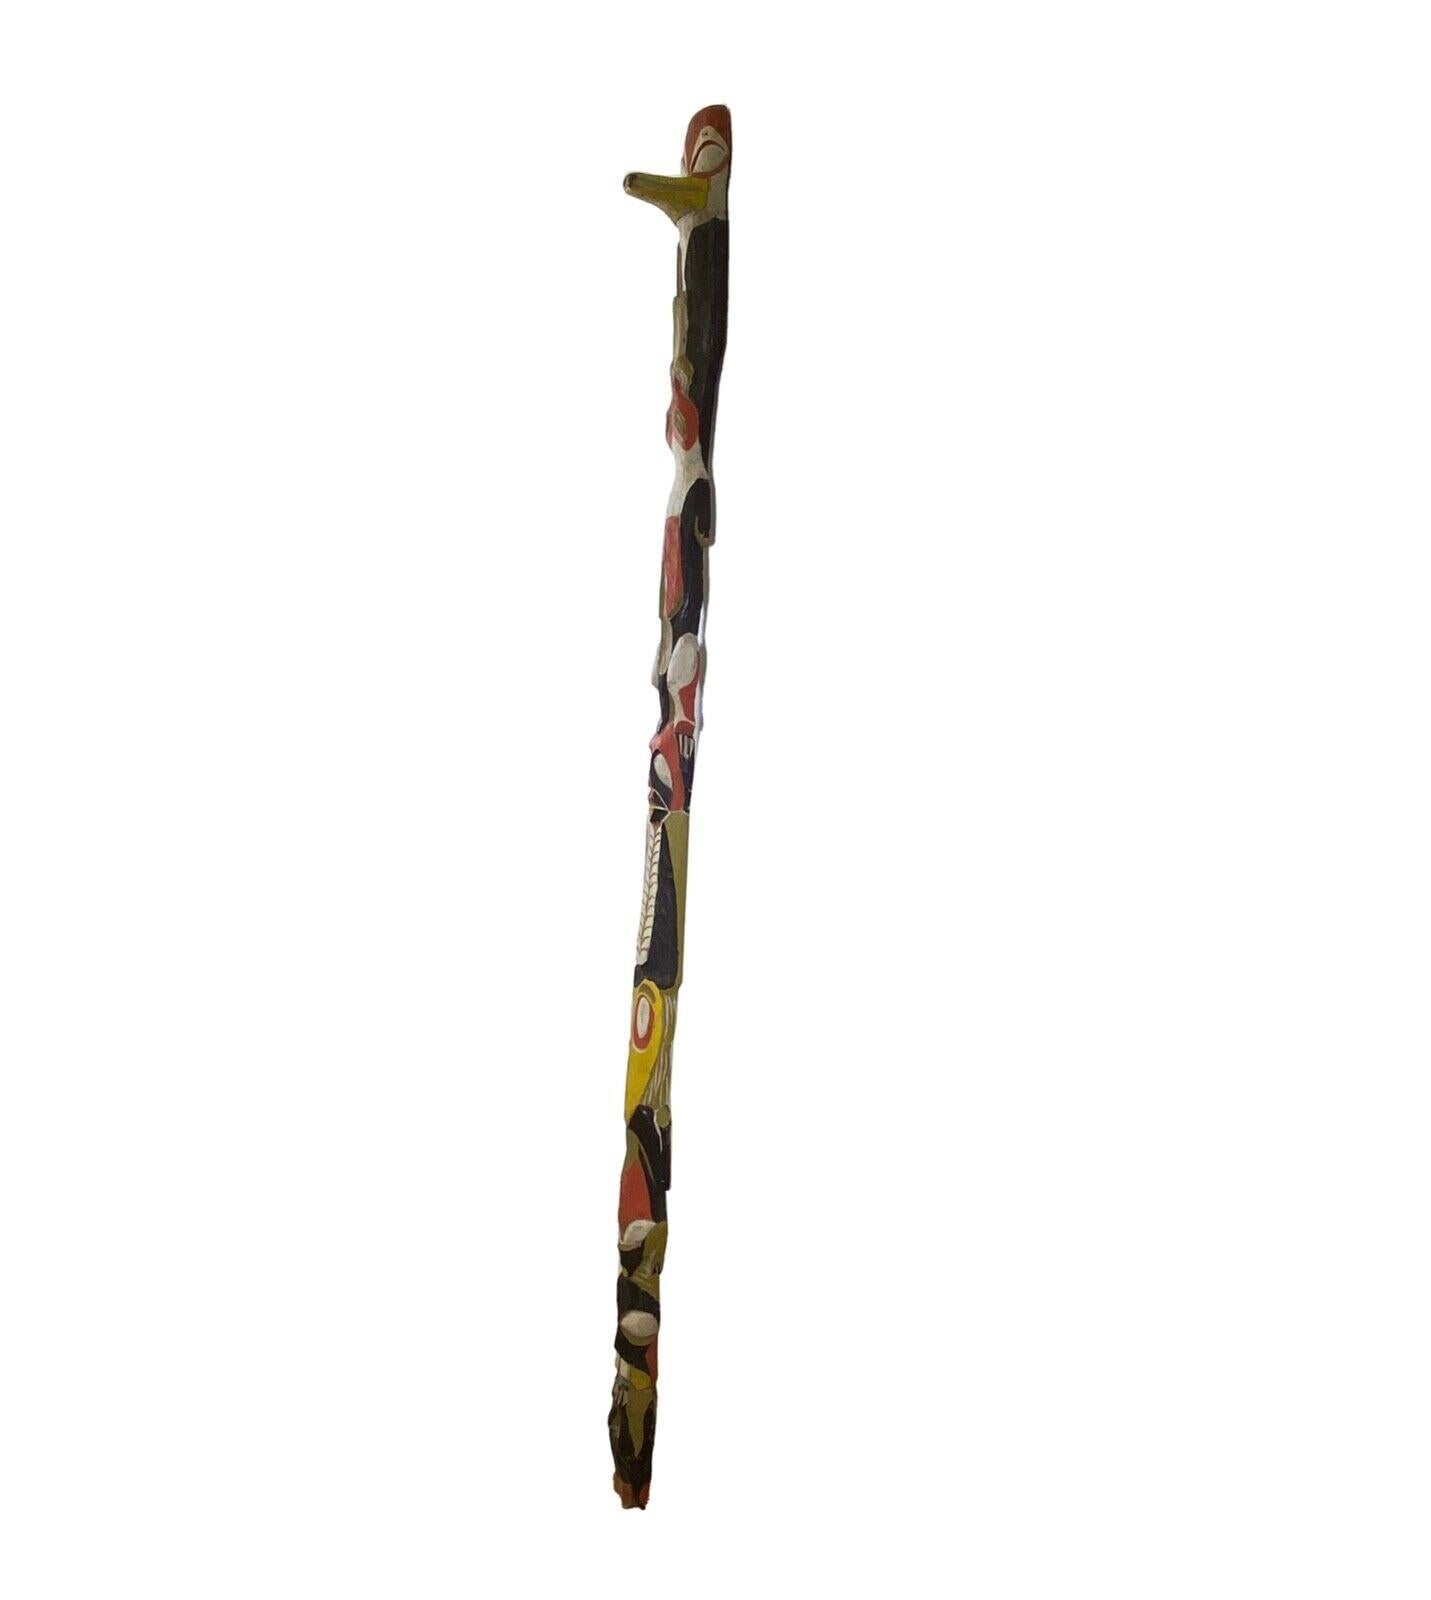 A mid century modernist wooden carved totem pole titled “Snowden” by Irving Berg. Identified on tag via the verso. A monumental totem with unique hand carved details that are brightly painted. From a private collection. Dimensions: 84”h x 5”w x 6”d.